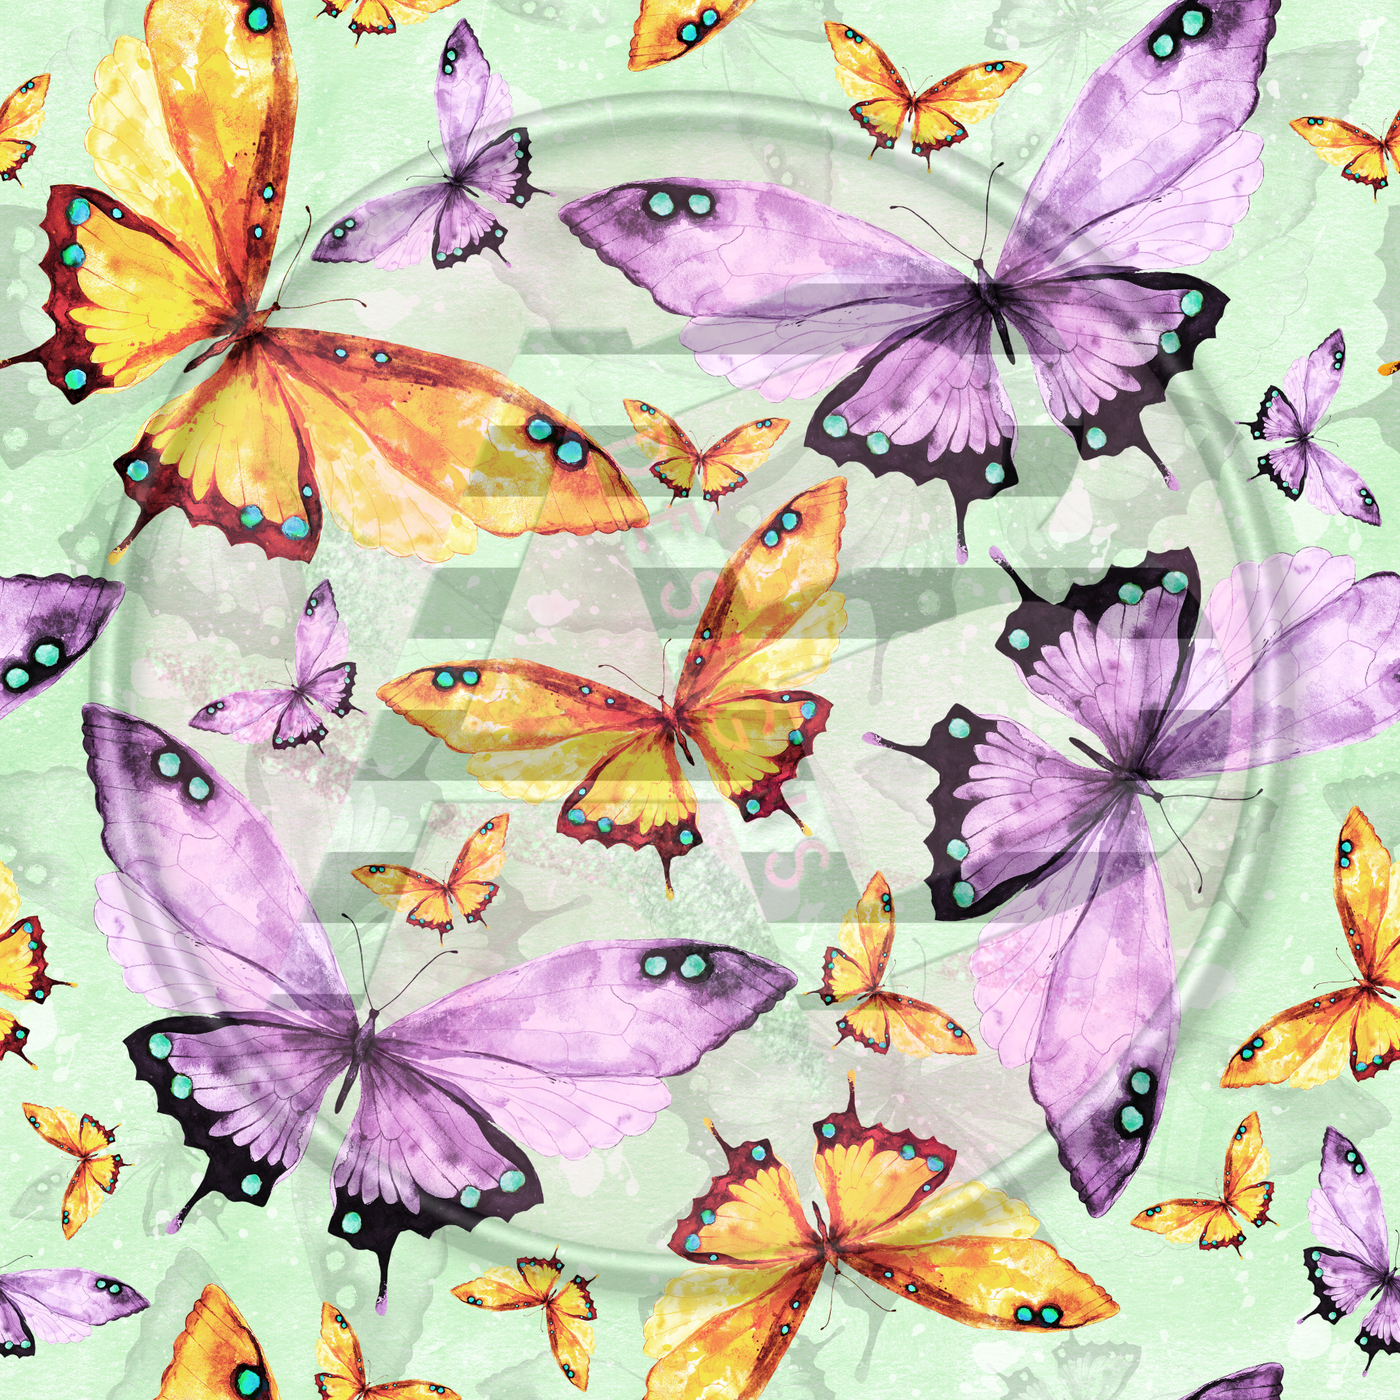 Adhesive Patterned Vinyl - Butterfly 09